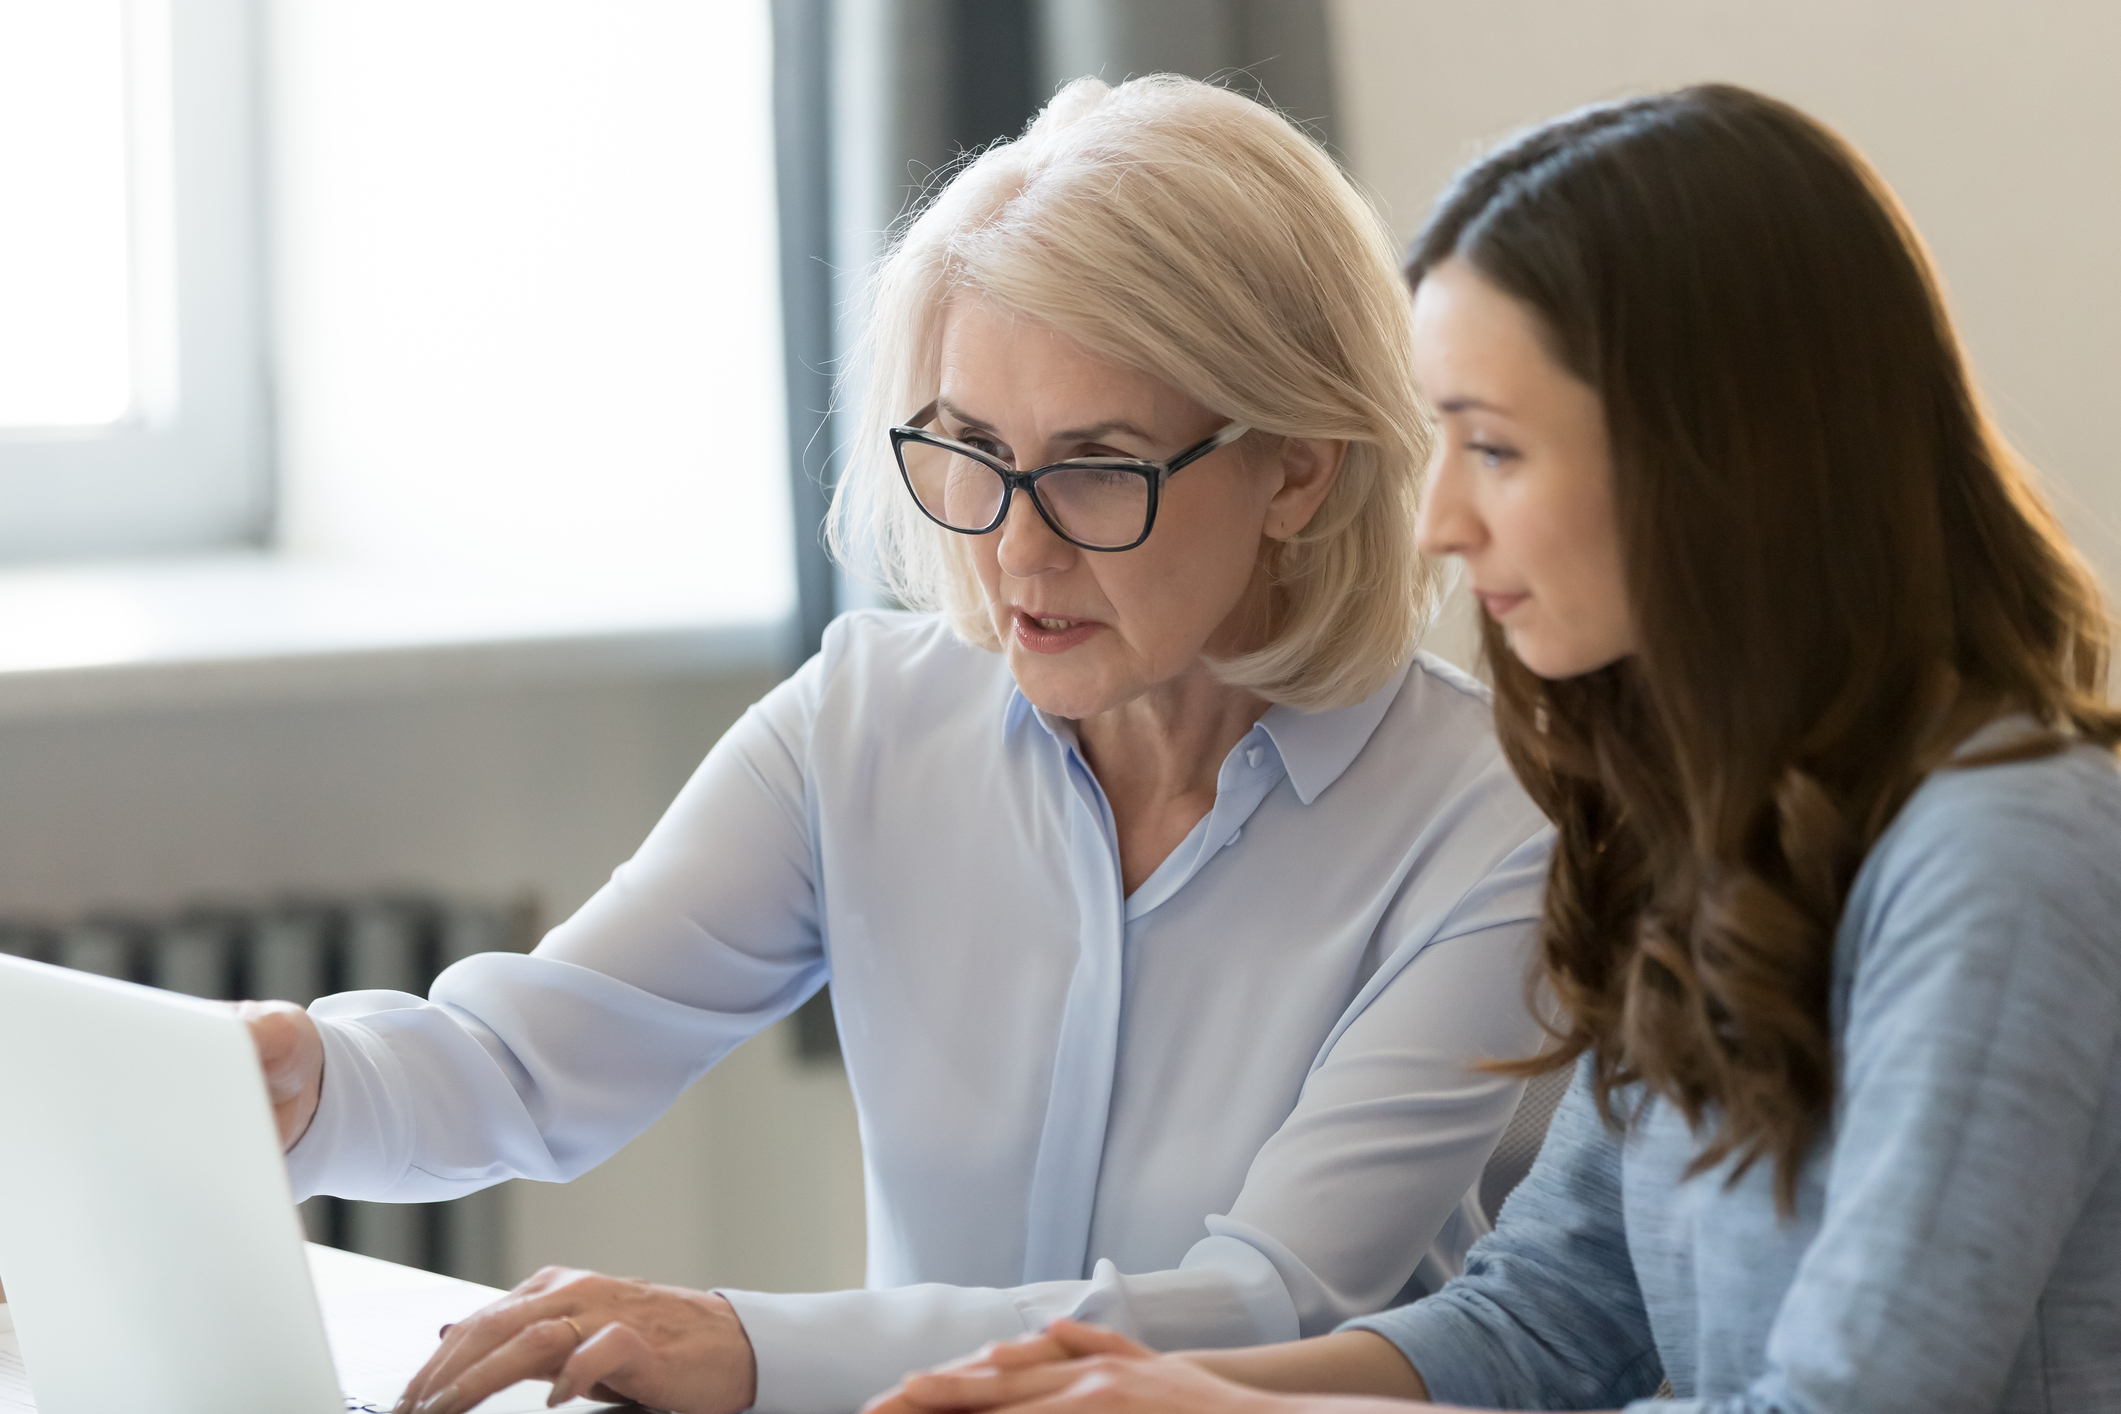 Older executive woman with black glasses and a light blue collared shirt points to a laptop screen as she teaches a younger woman new processes.